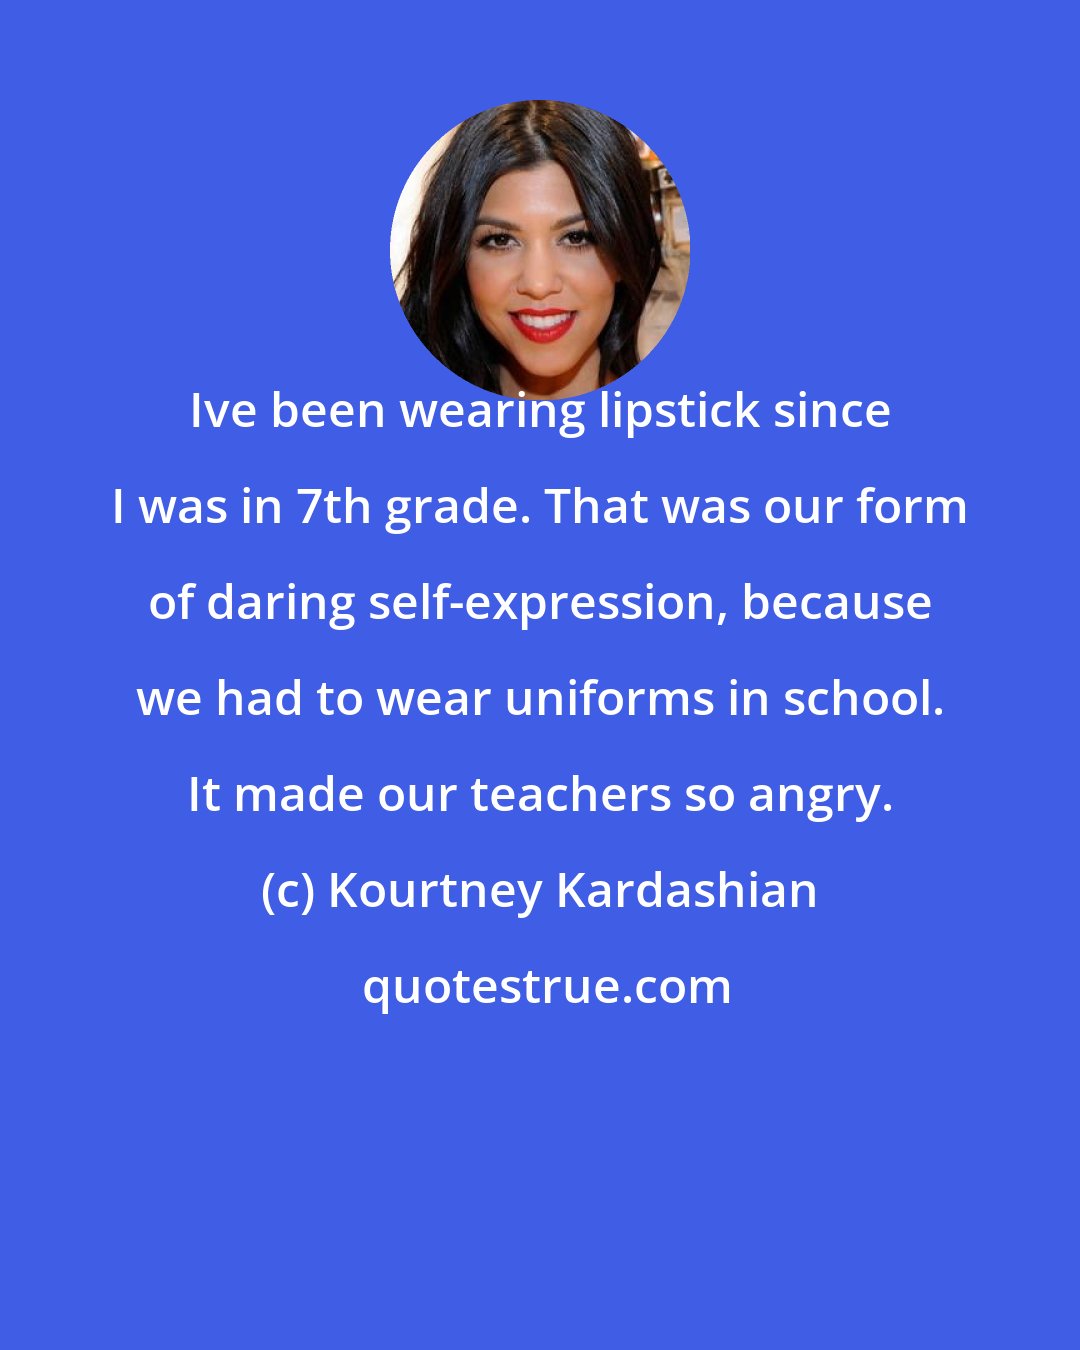 Kourtney Kardashian: Ive been wearing lipstick since I was in 7th grade. That was our form of daring self-expression, because we had to wear uniforms in school. It made our teachers so angry.